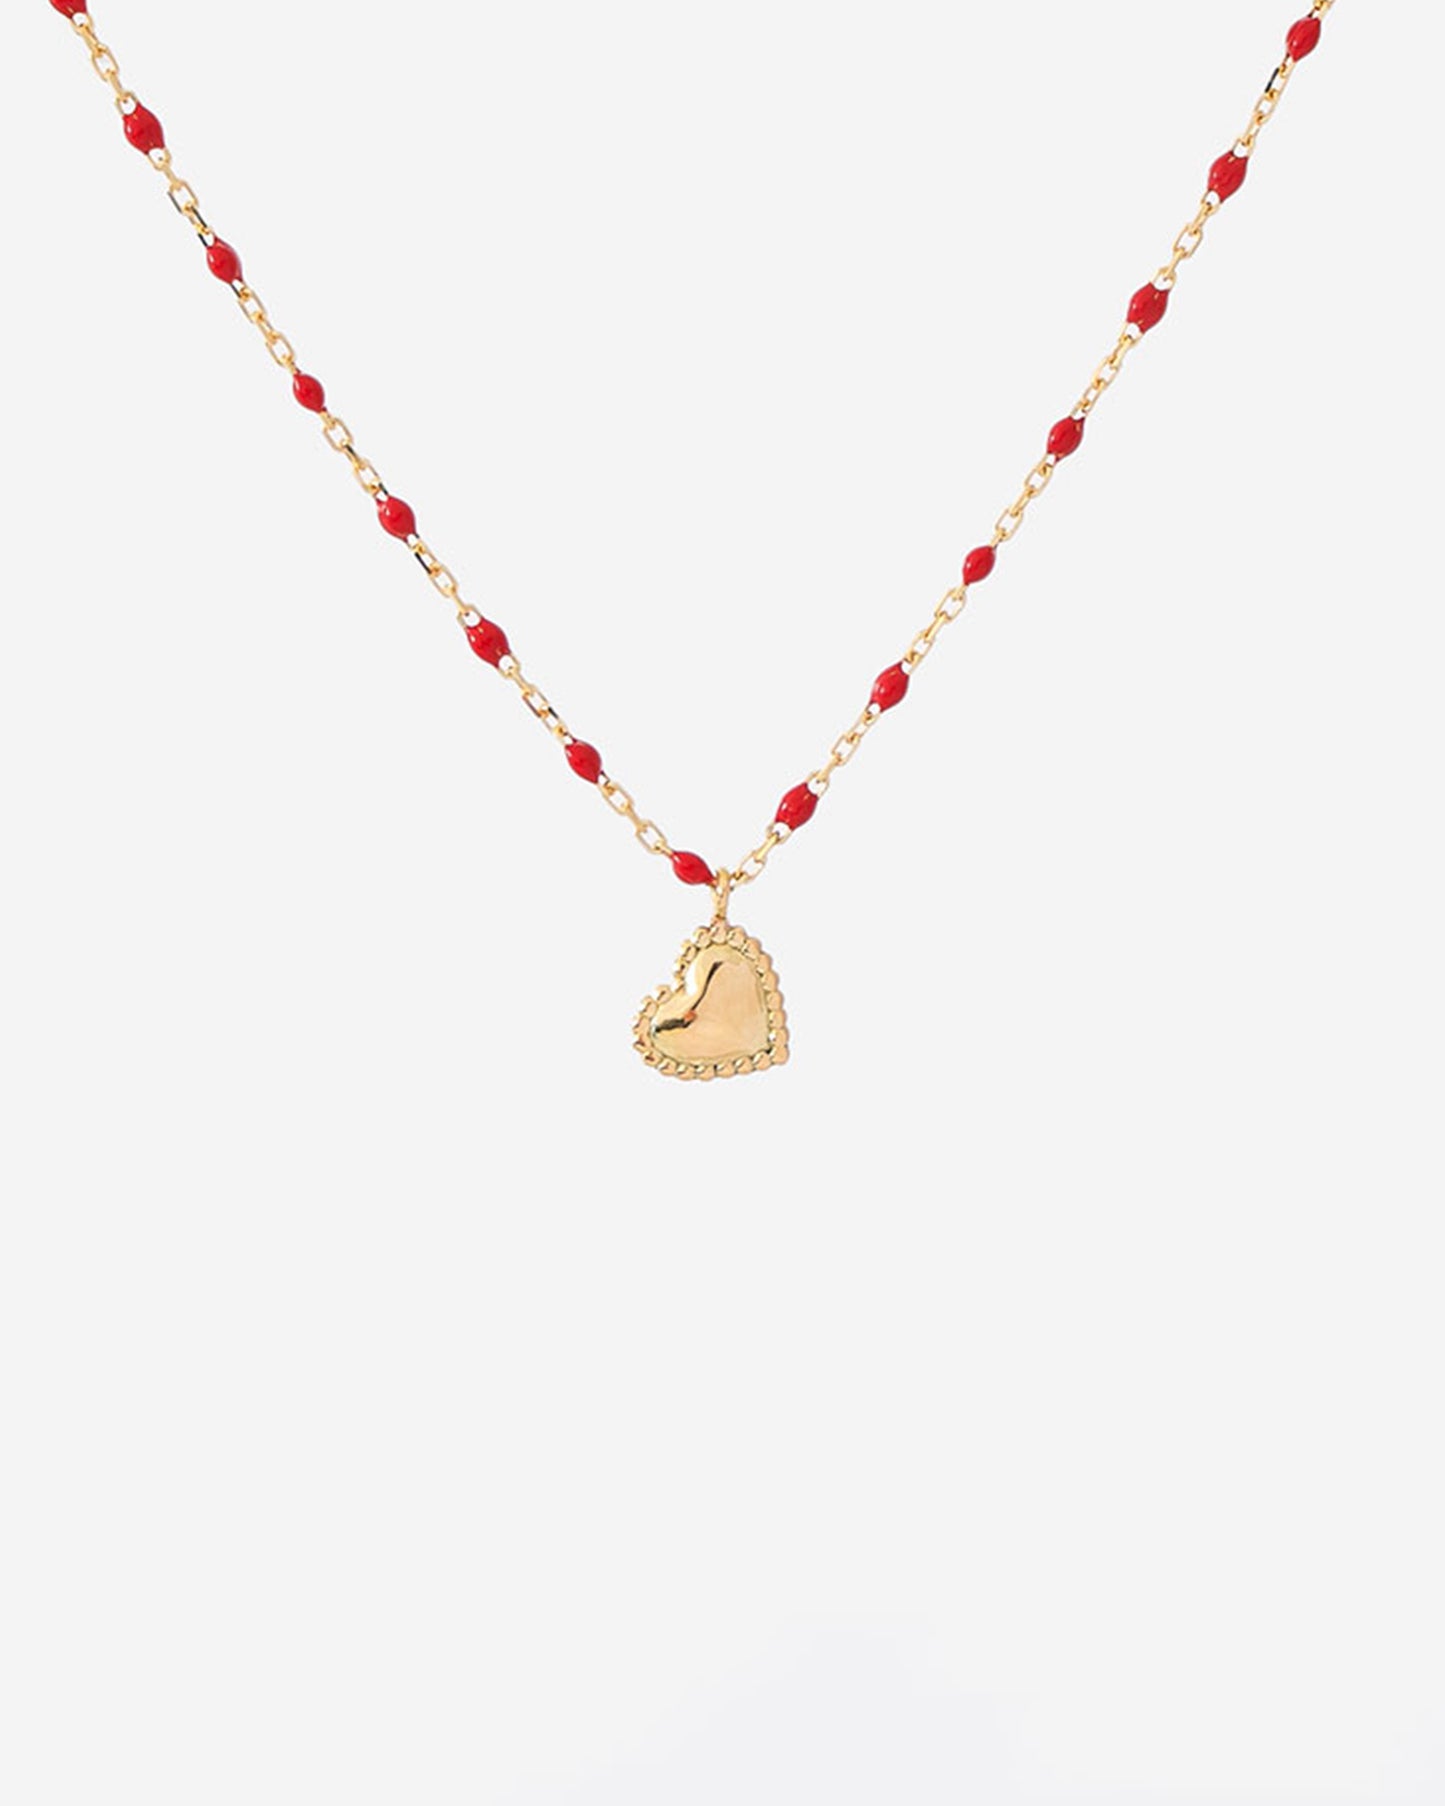 A thin yellow gold chain necklace with mini poppy red resin beads and a little dangling heart pendant.